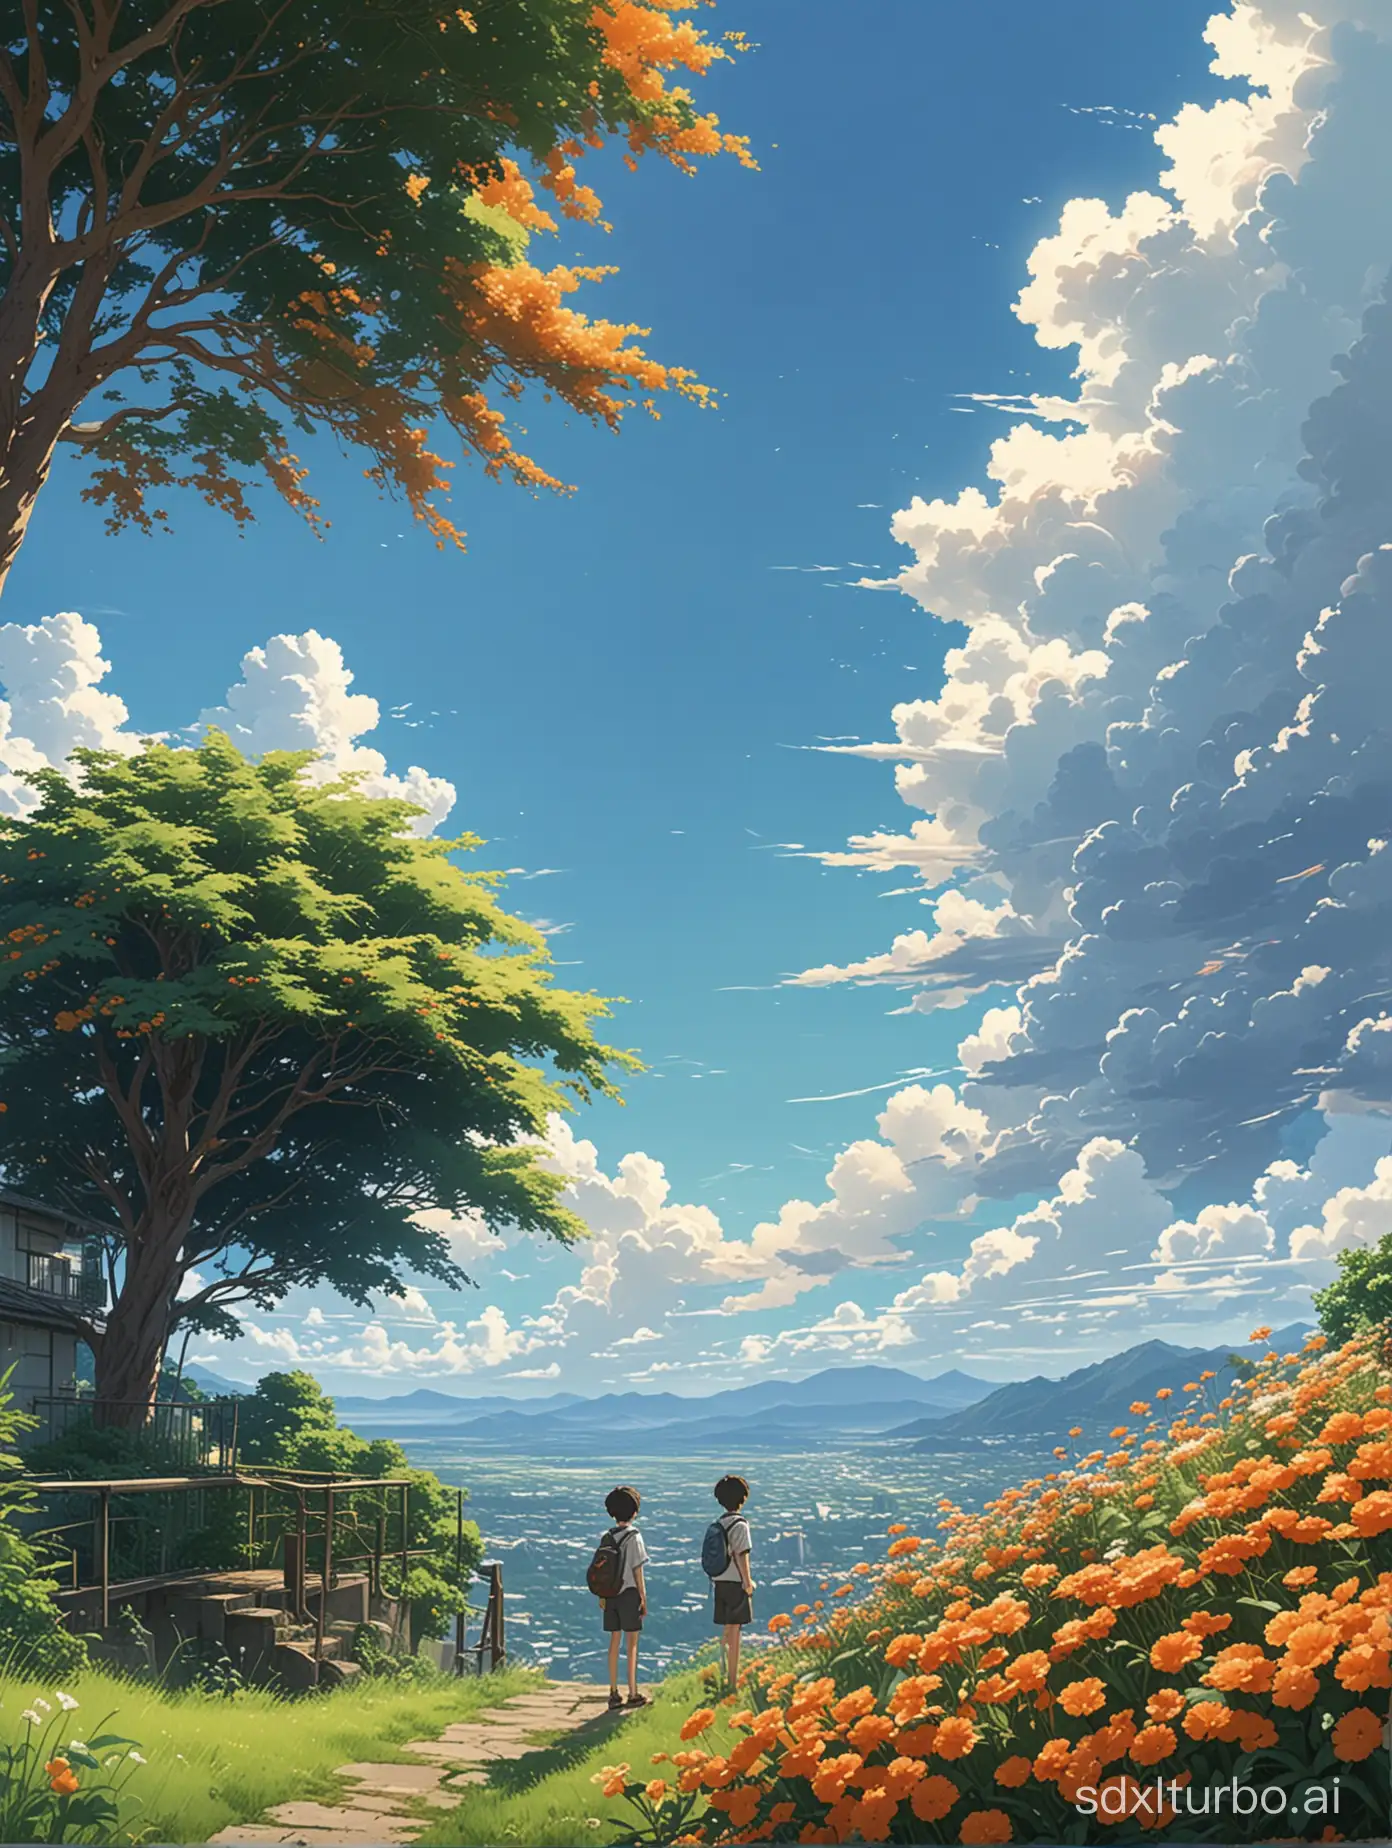 A stunning, vivid Makoto Shinkai-inspired anime scene where a young boy stands on the roof of a building reclaimed by nature, now covered in lush  tall green grass and vibrant flowers., and the boy has one hand on it, gazing at the vast blue sky adorned with fluffy white clouds. Behind him, a tall orange-leafed tree stands proud, its branches reaching towards the heavens. The high-angle view captures the serene beauty of the scene, with a sense of solitude and wonder.